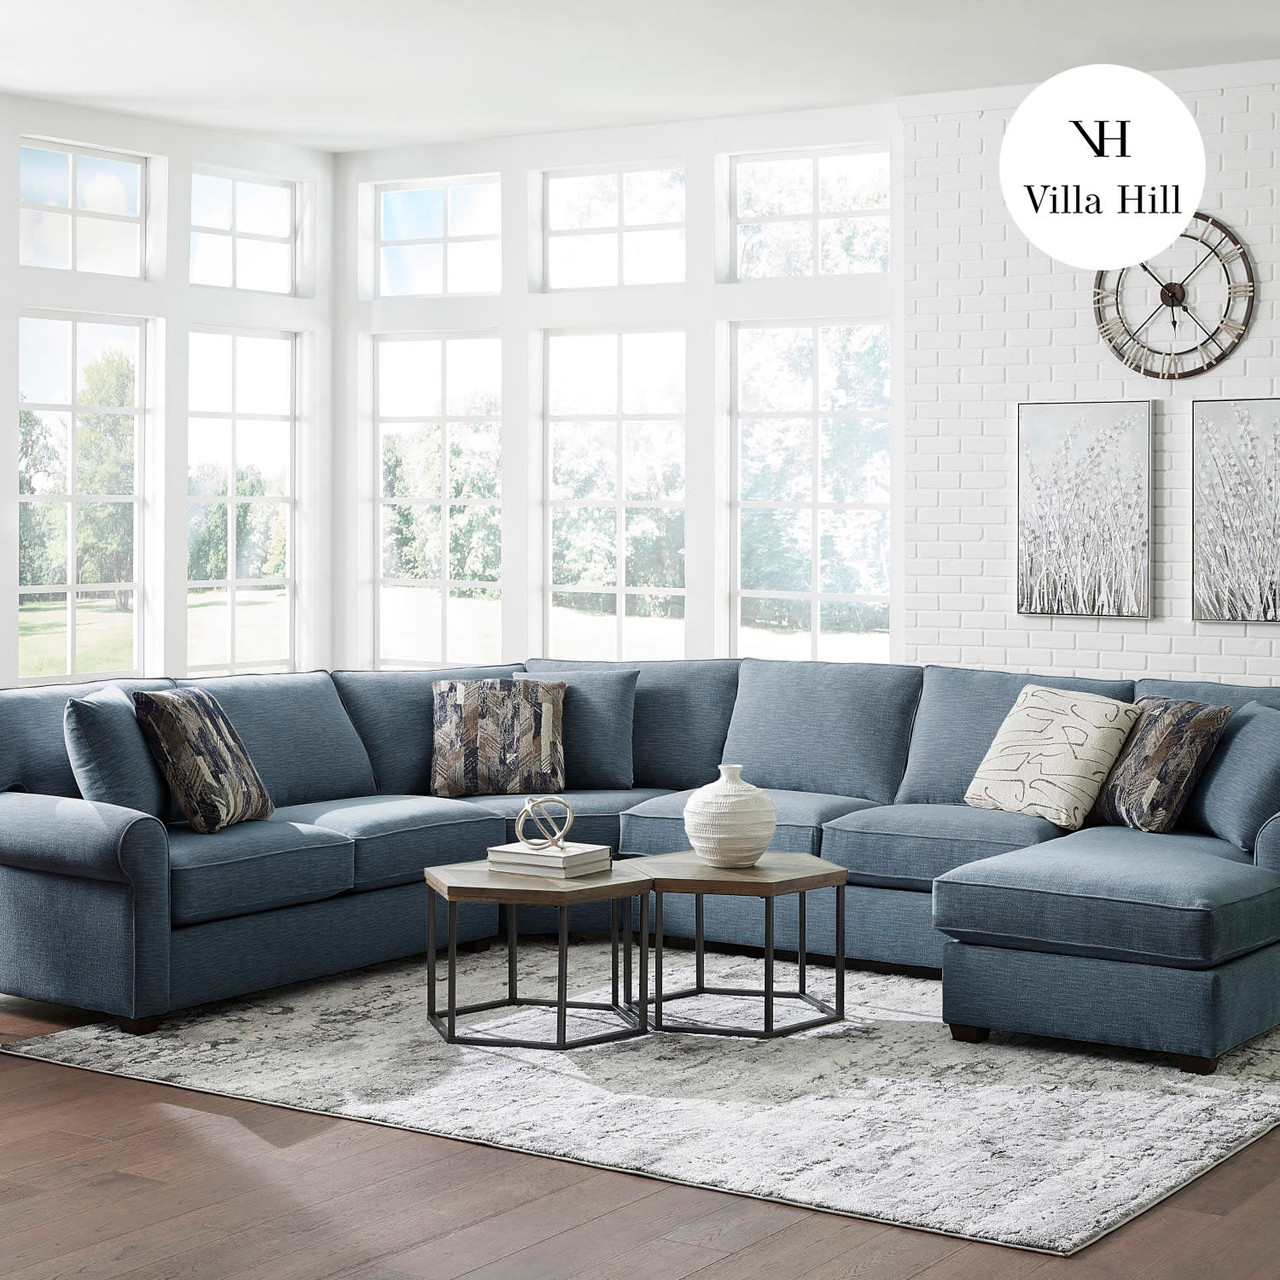 Crestview Rolled Arm Blue 4-pc sectional w/ right chaise